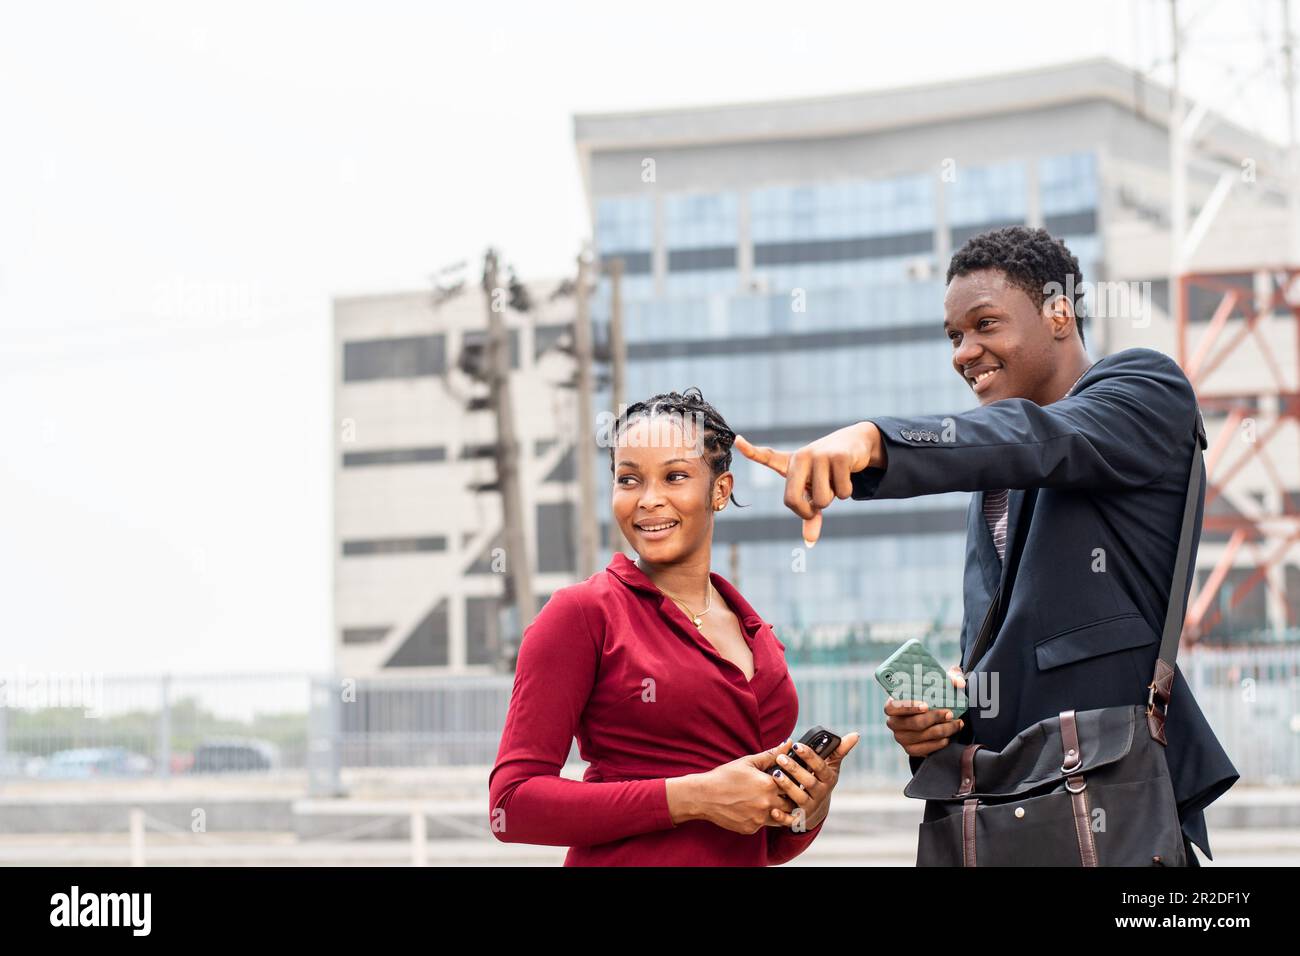 african man giving a lady directions Stock Photo